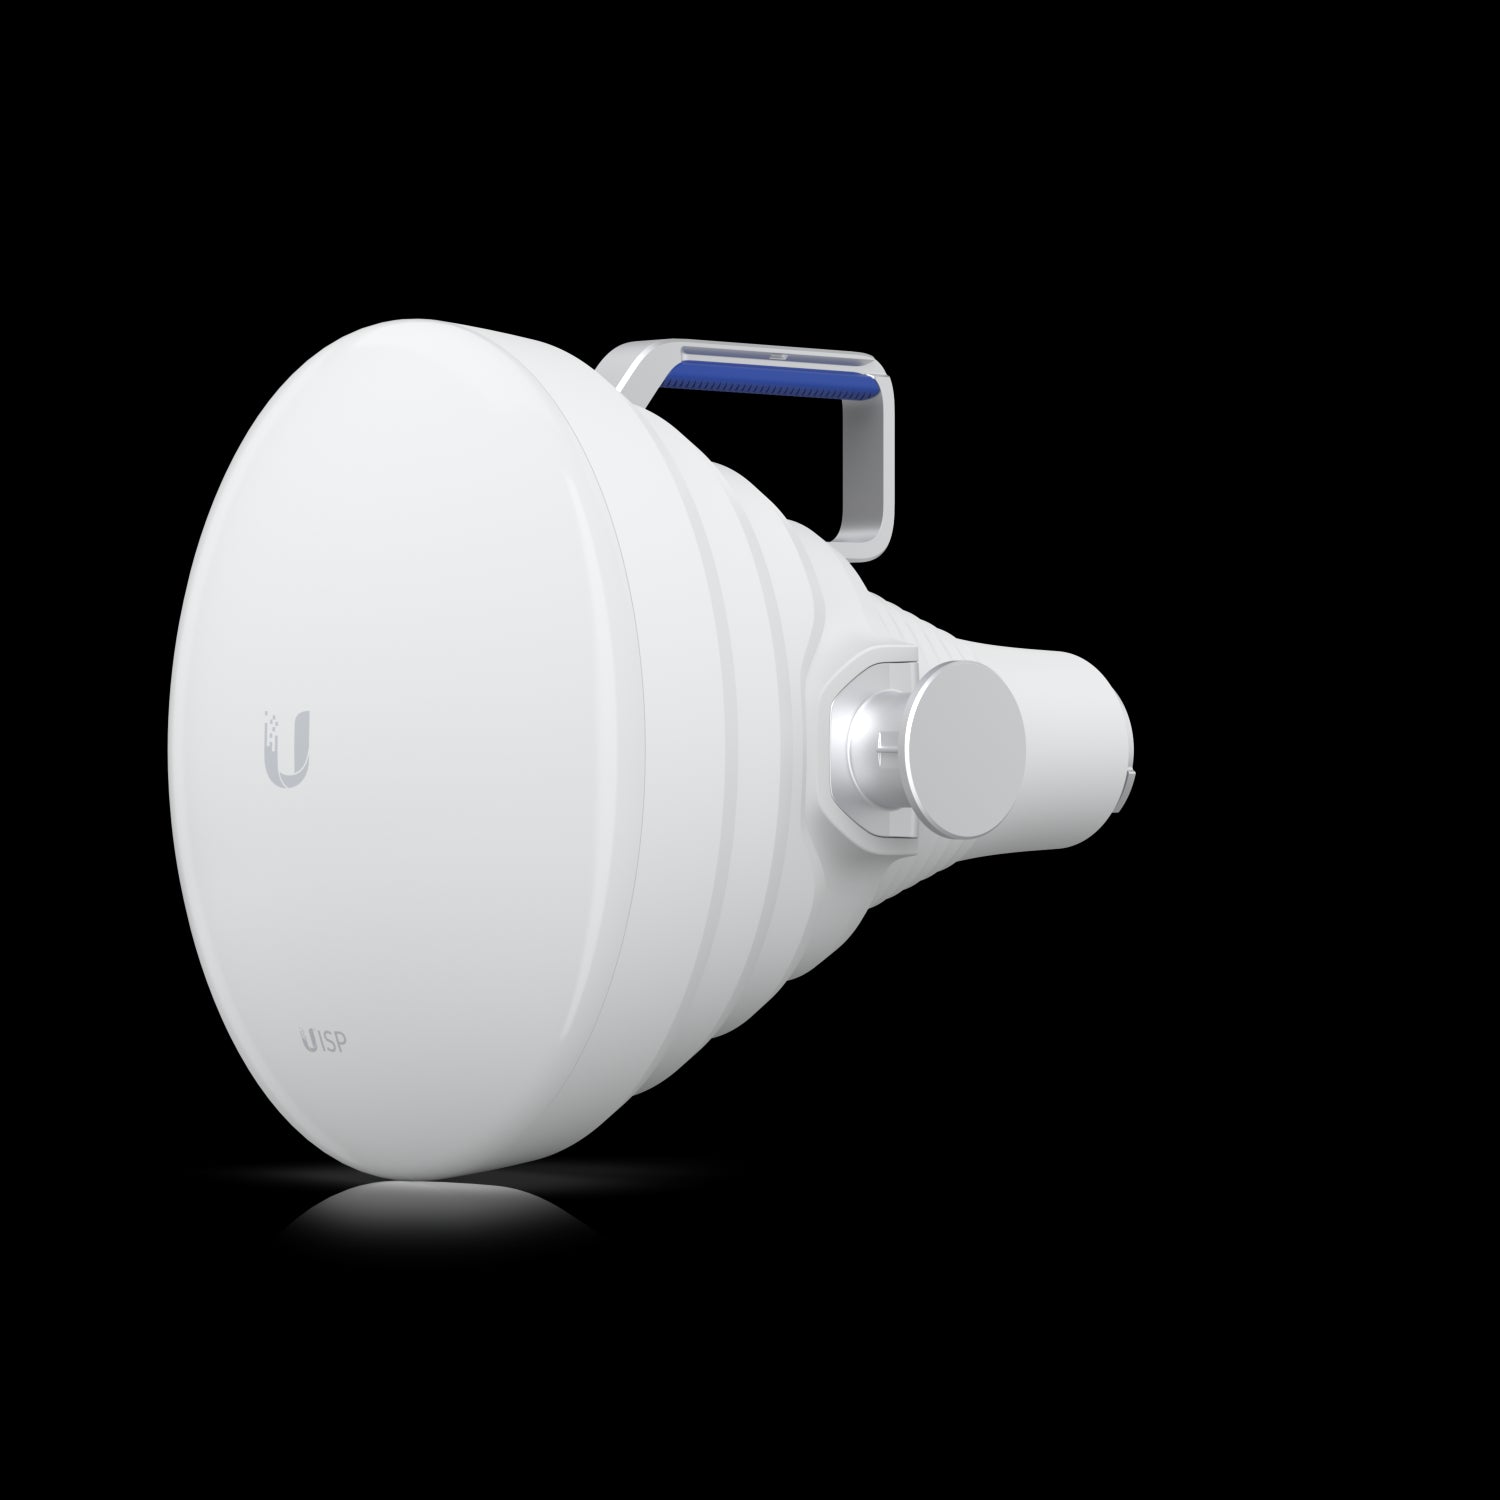 Ubiquiti UISP Horn,High-isolation 30° , Point-to-multipoint (PtMP) Horn Antenna, 5.15 - 6.875 Ghz frequency range, 15+ km PtMP link range-0